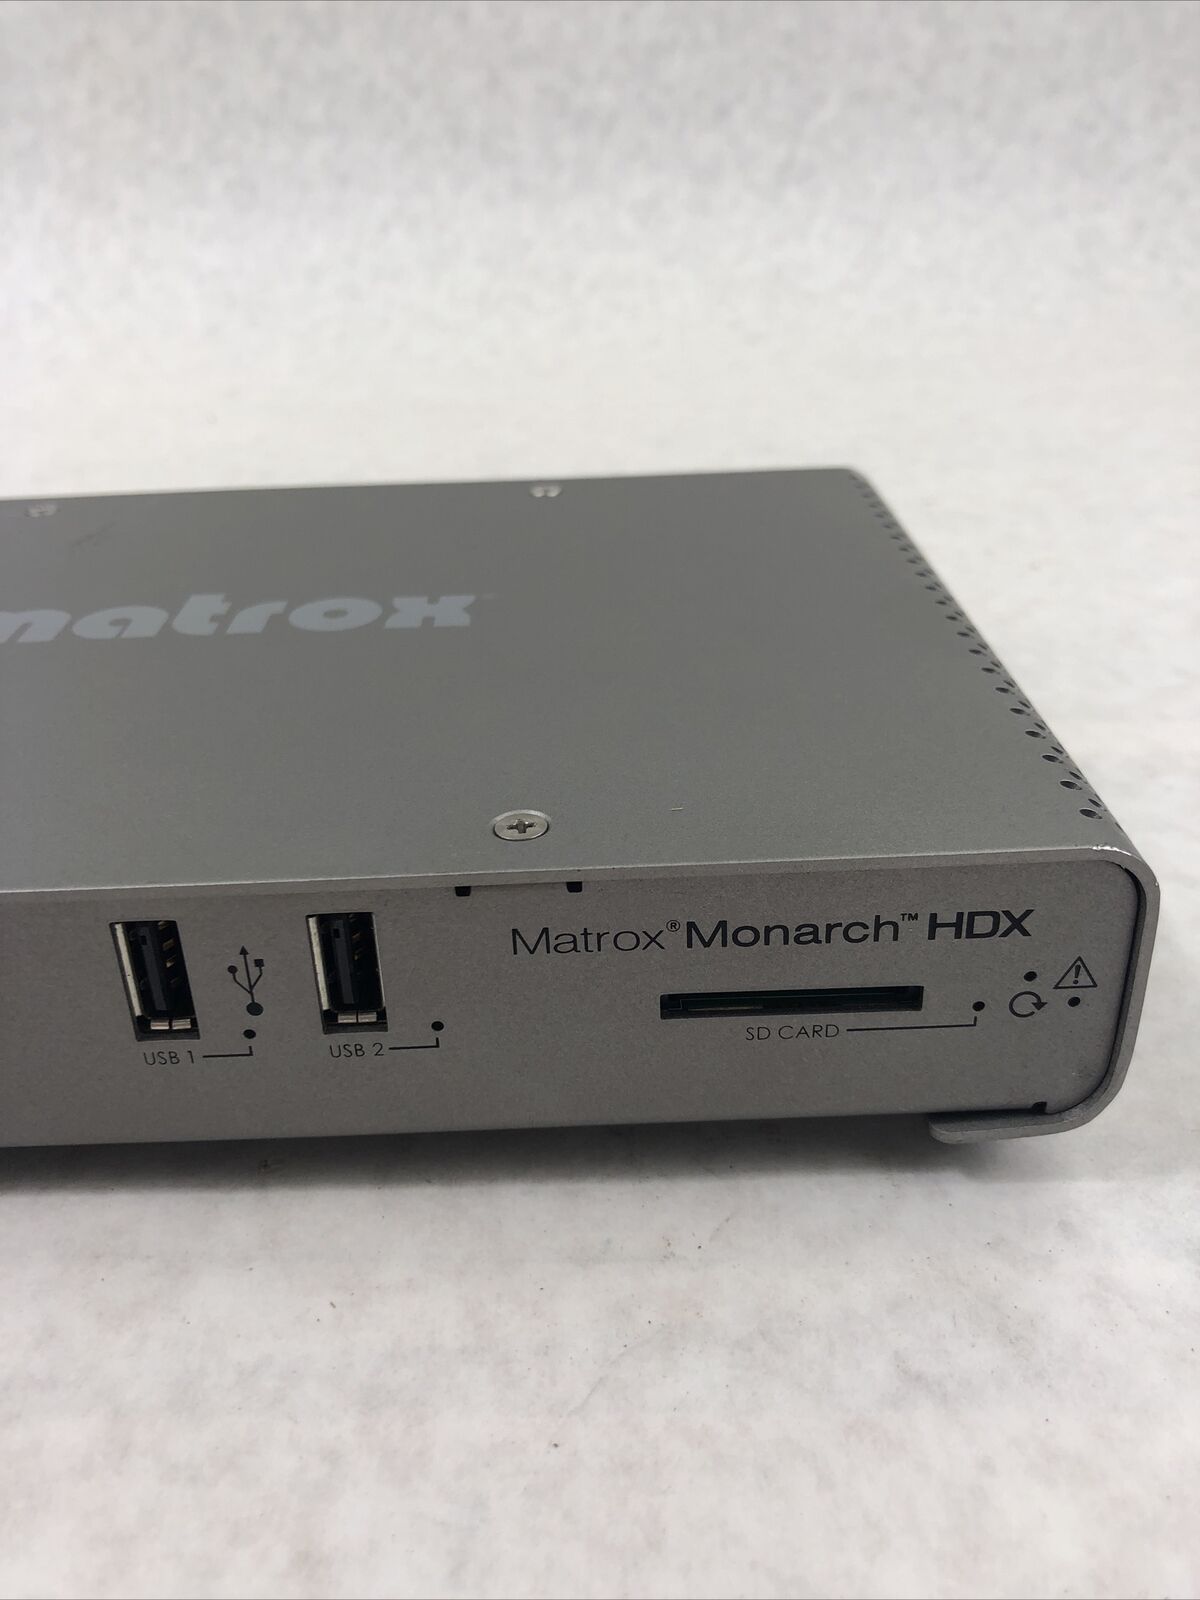 Matrox Monarch HDX MHDX/I Dual-Channel H.264 Video Encoder - No Power Adapter